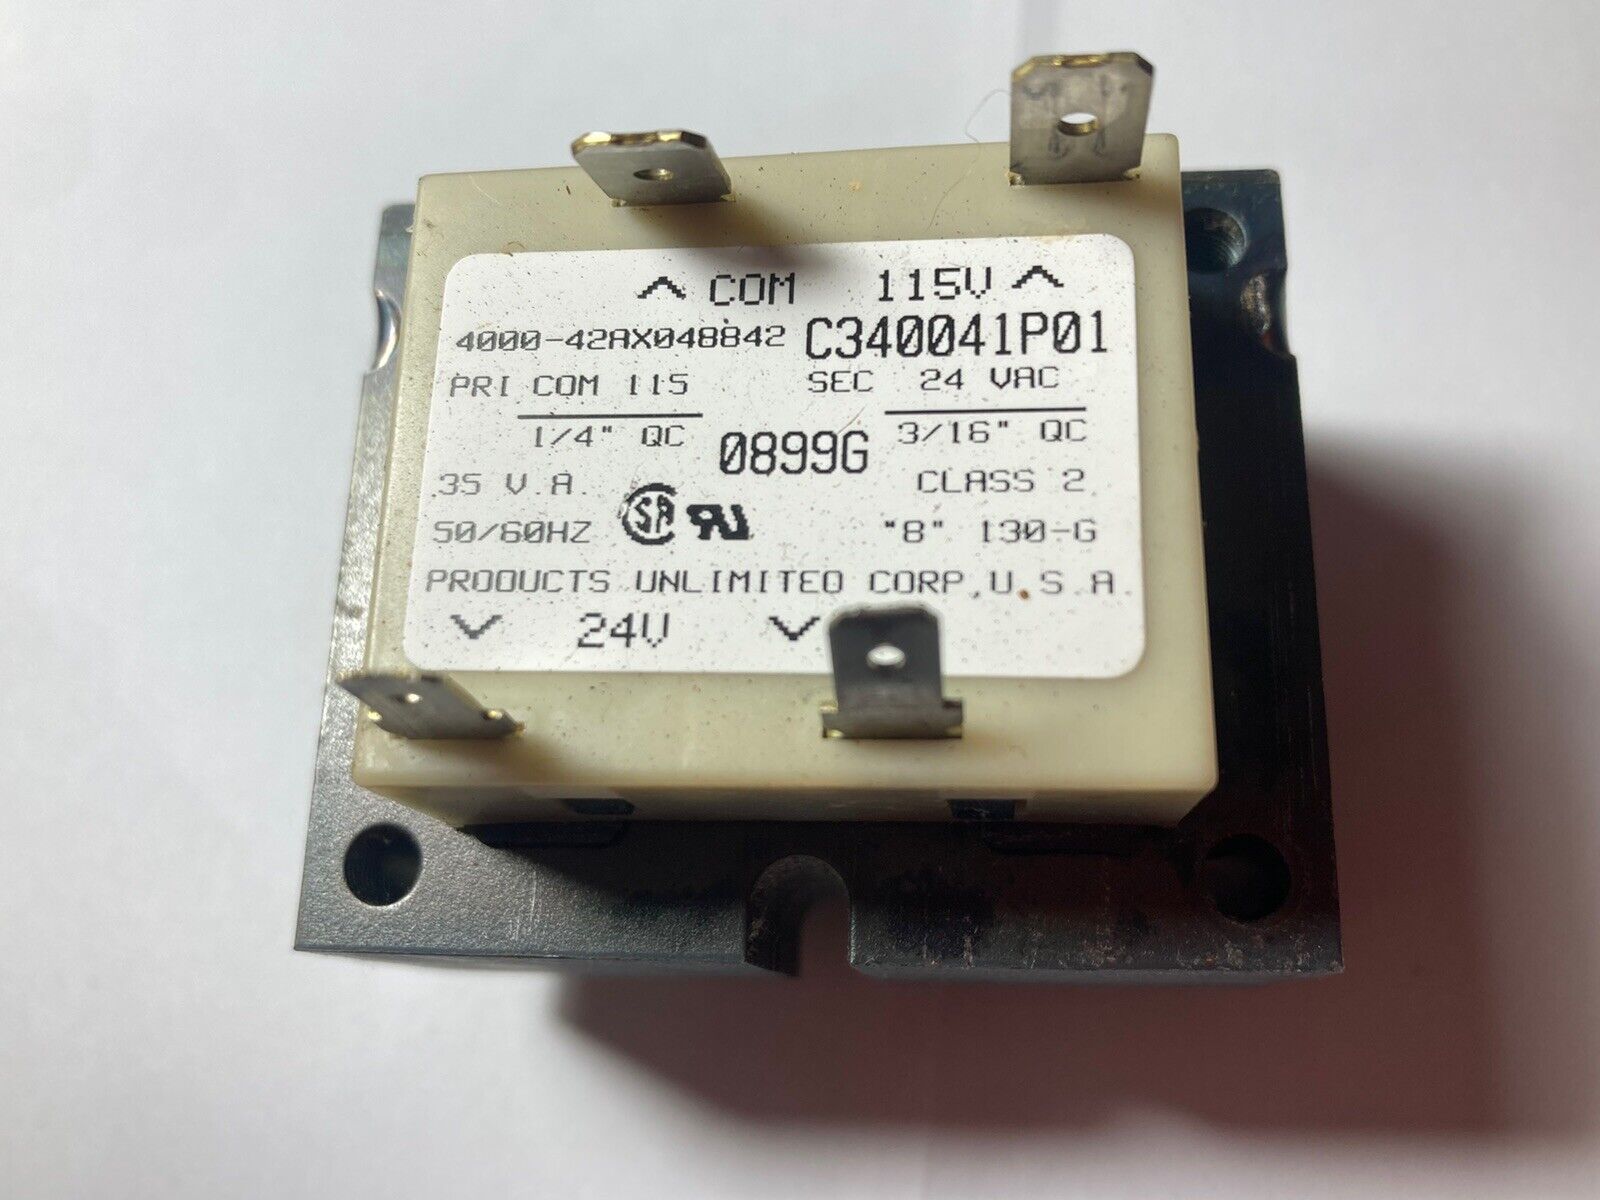 4000-42ax048842 C340041P01 PRODUCTS UNLIMITED TRANSFORMER  242